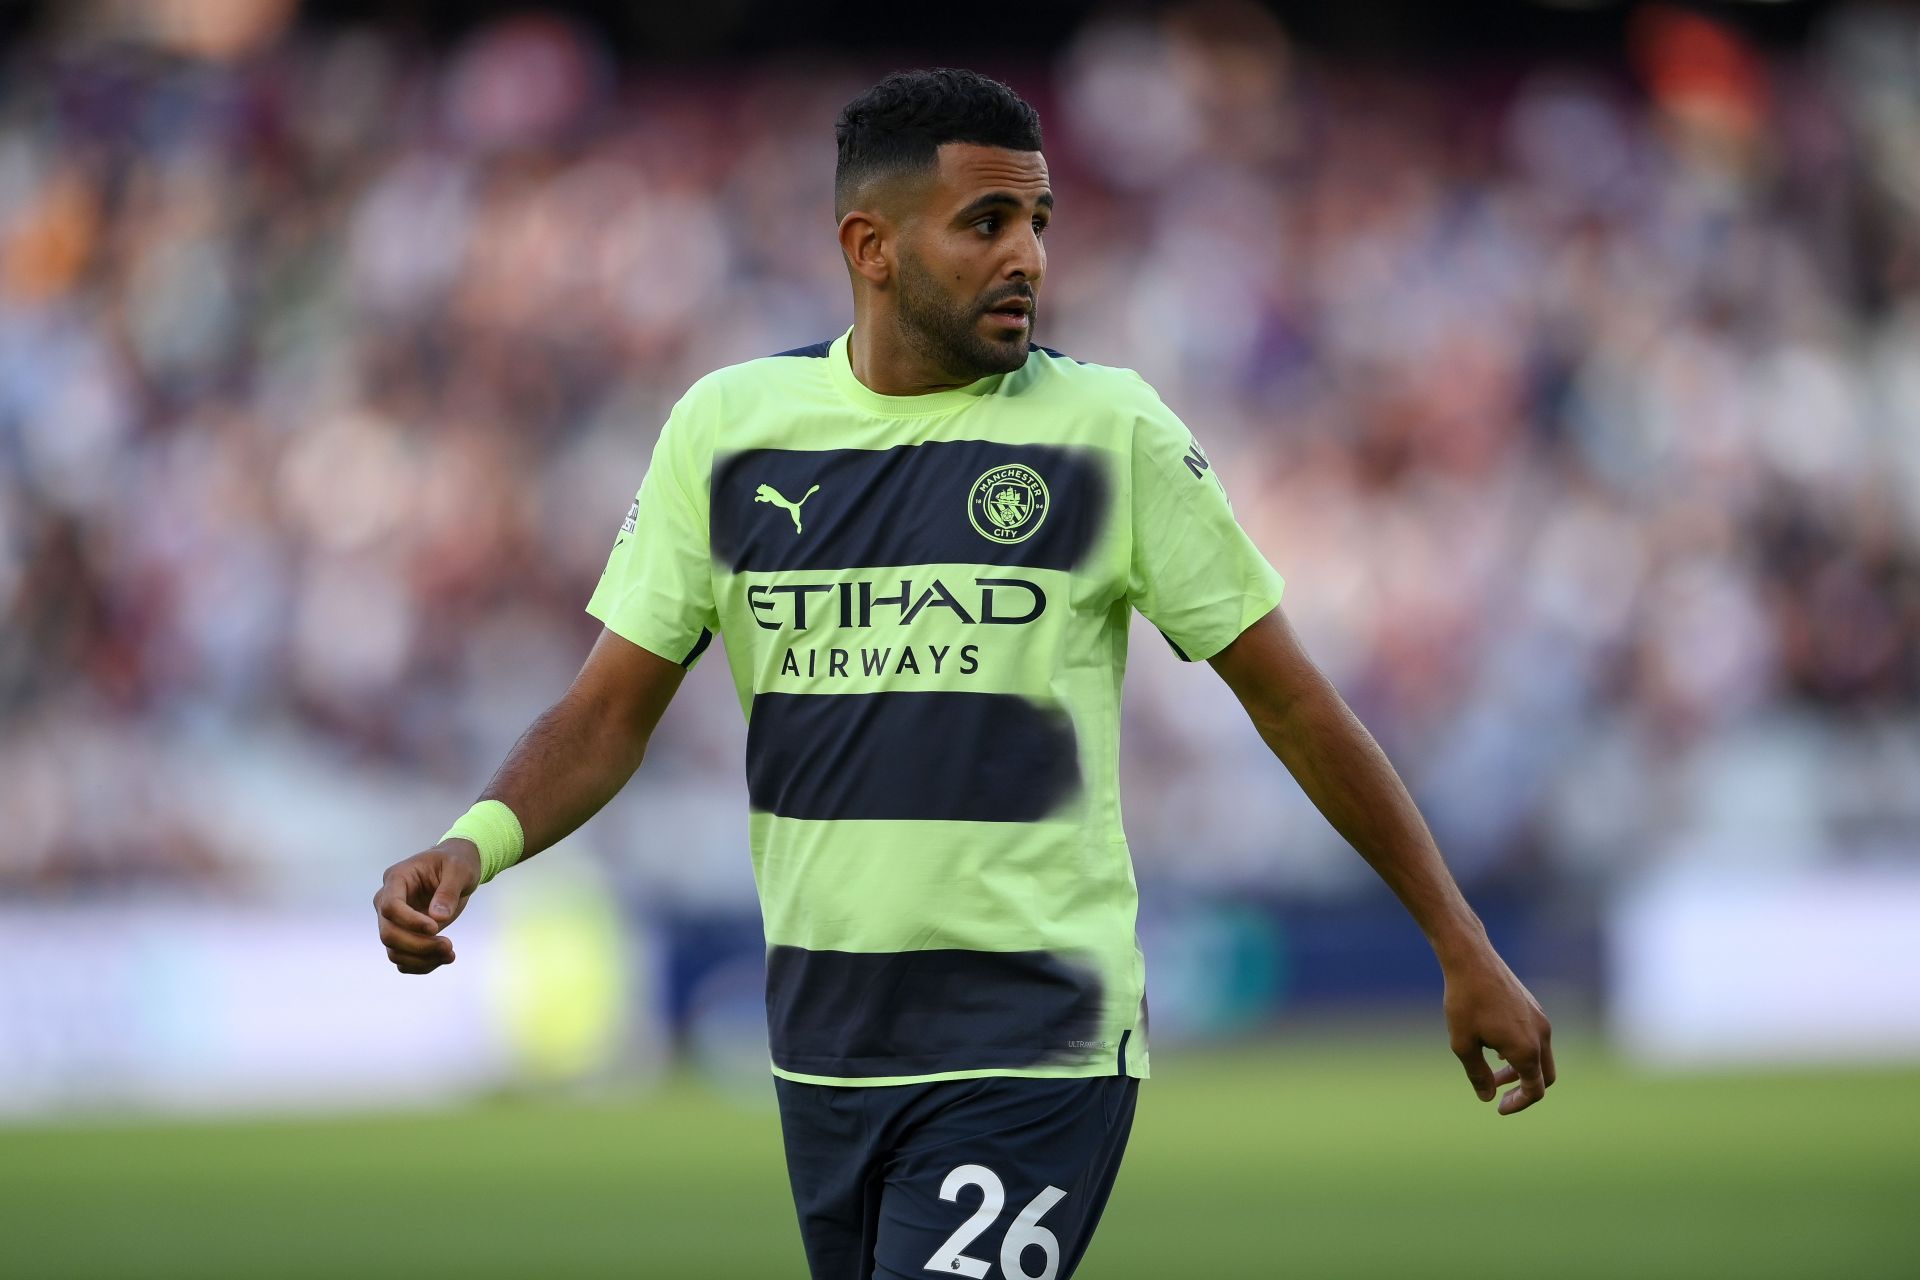 Riyad Mahrez is without a Premier League goal for Manchester City this season